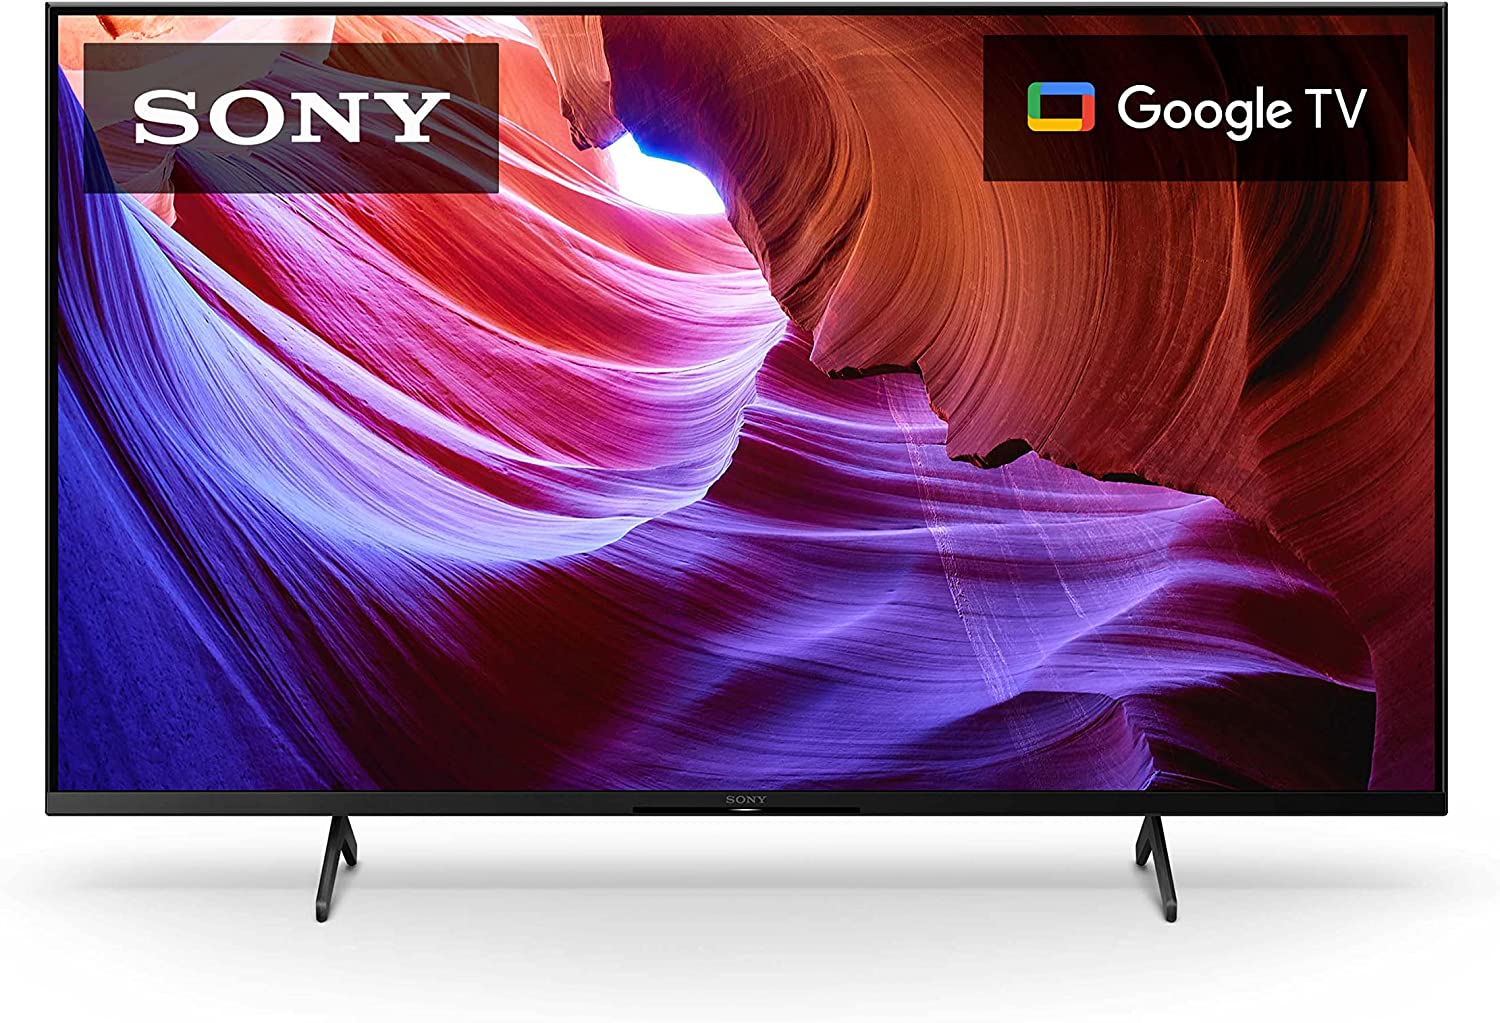 Sony 43 Inch 4K Ultra HD TV X85K Series- LED Smart Google TV(Bluetooth, Wi-Fi, USB, Ethernet, HDMI) with Dolby Vision HDR and Native 120HZ Refresh Rate